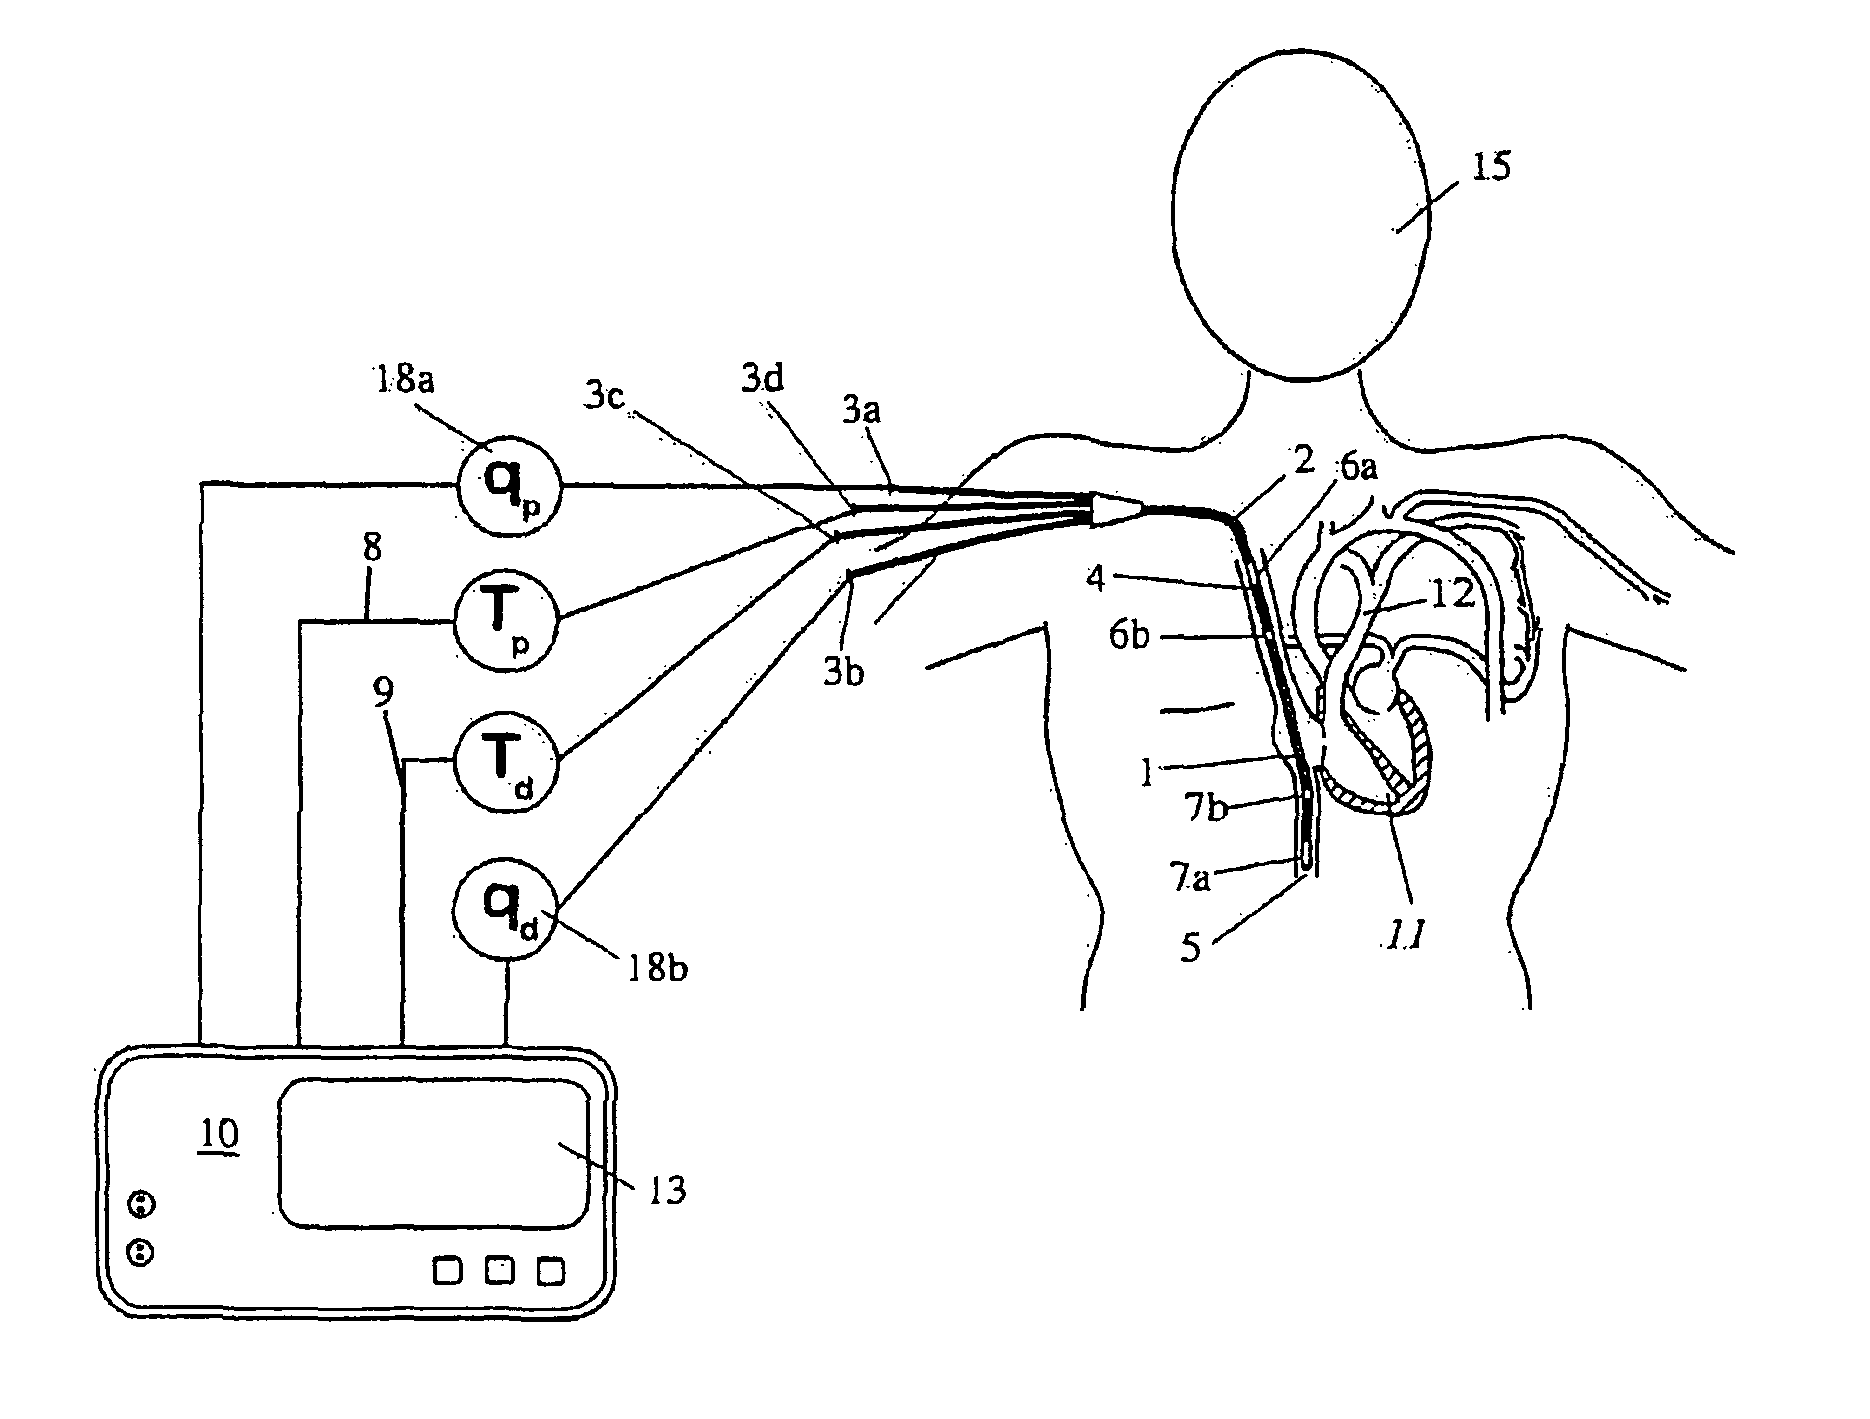 Central venous catheter assembly for measuring physiological data for cardiac output determination and method of determining cardiac output